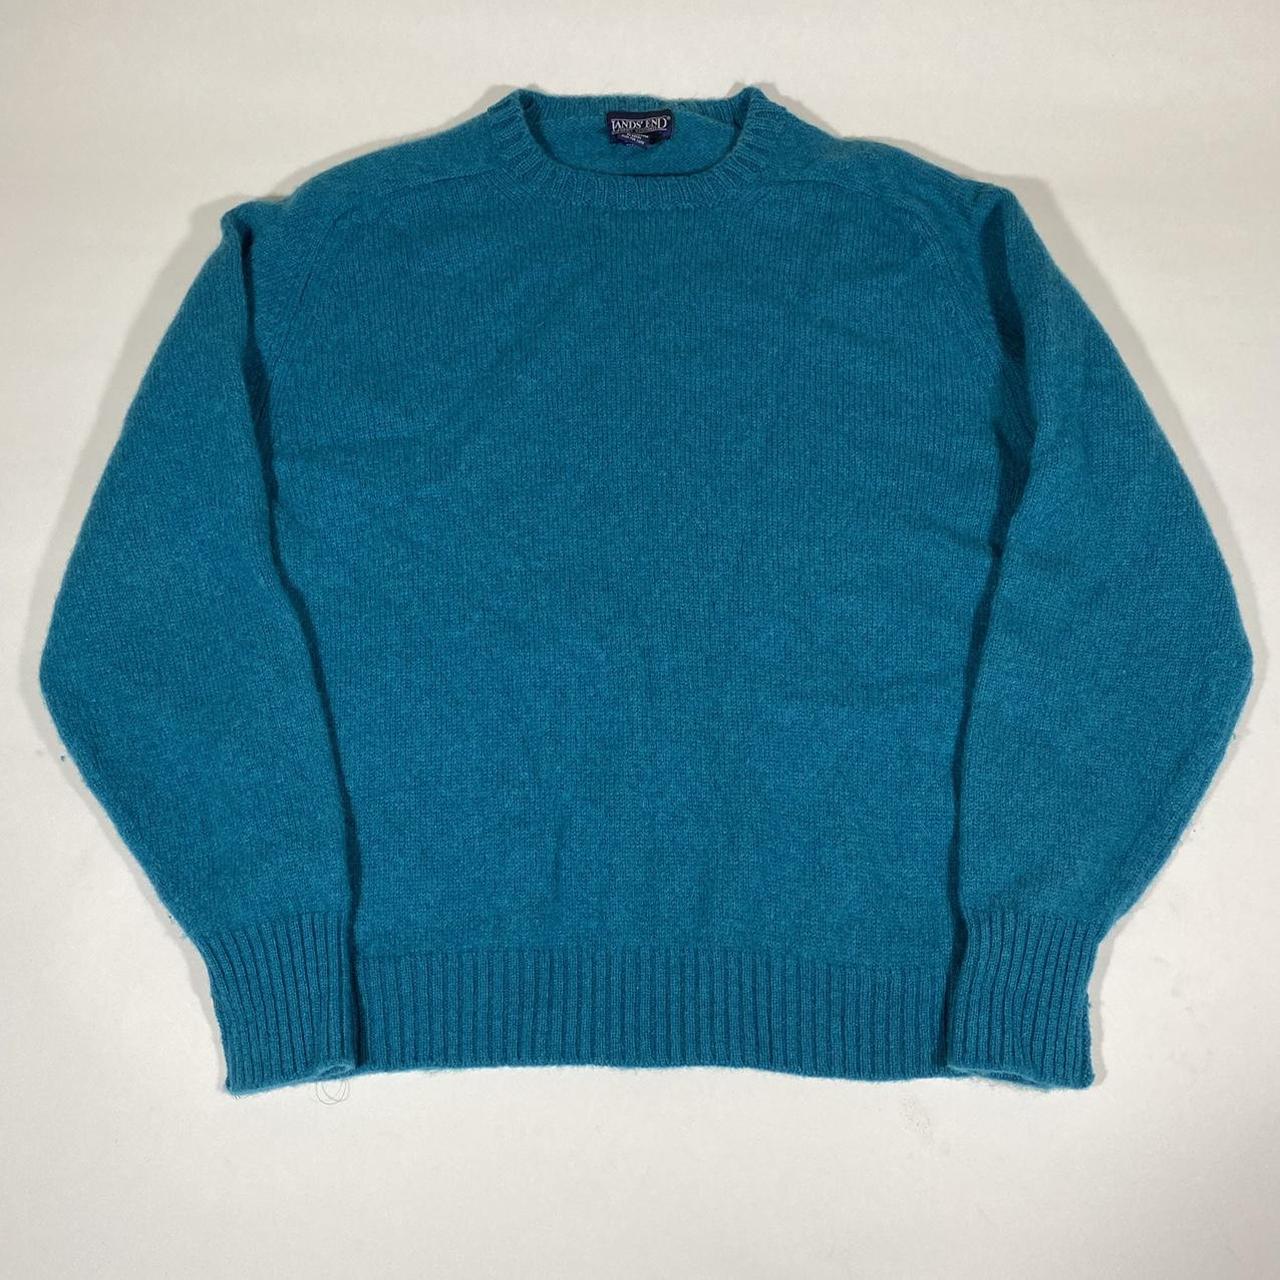 Vintage 90s teal knit sweater. Nice boxy shape and... - Depop